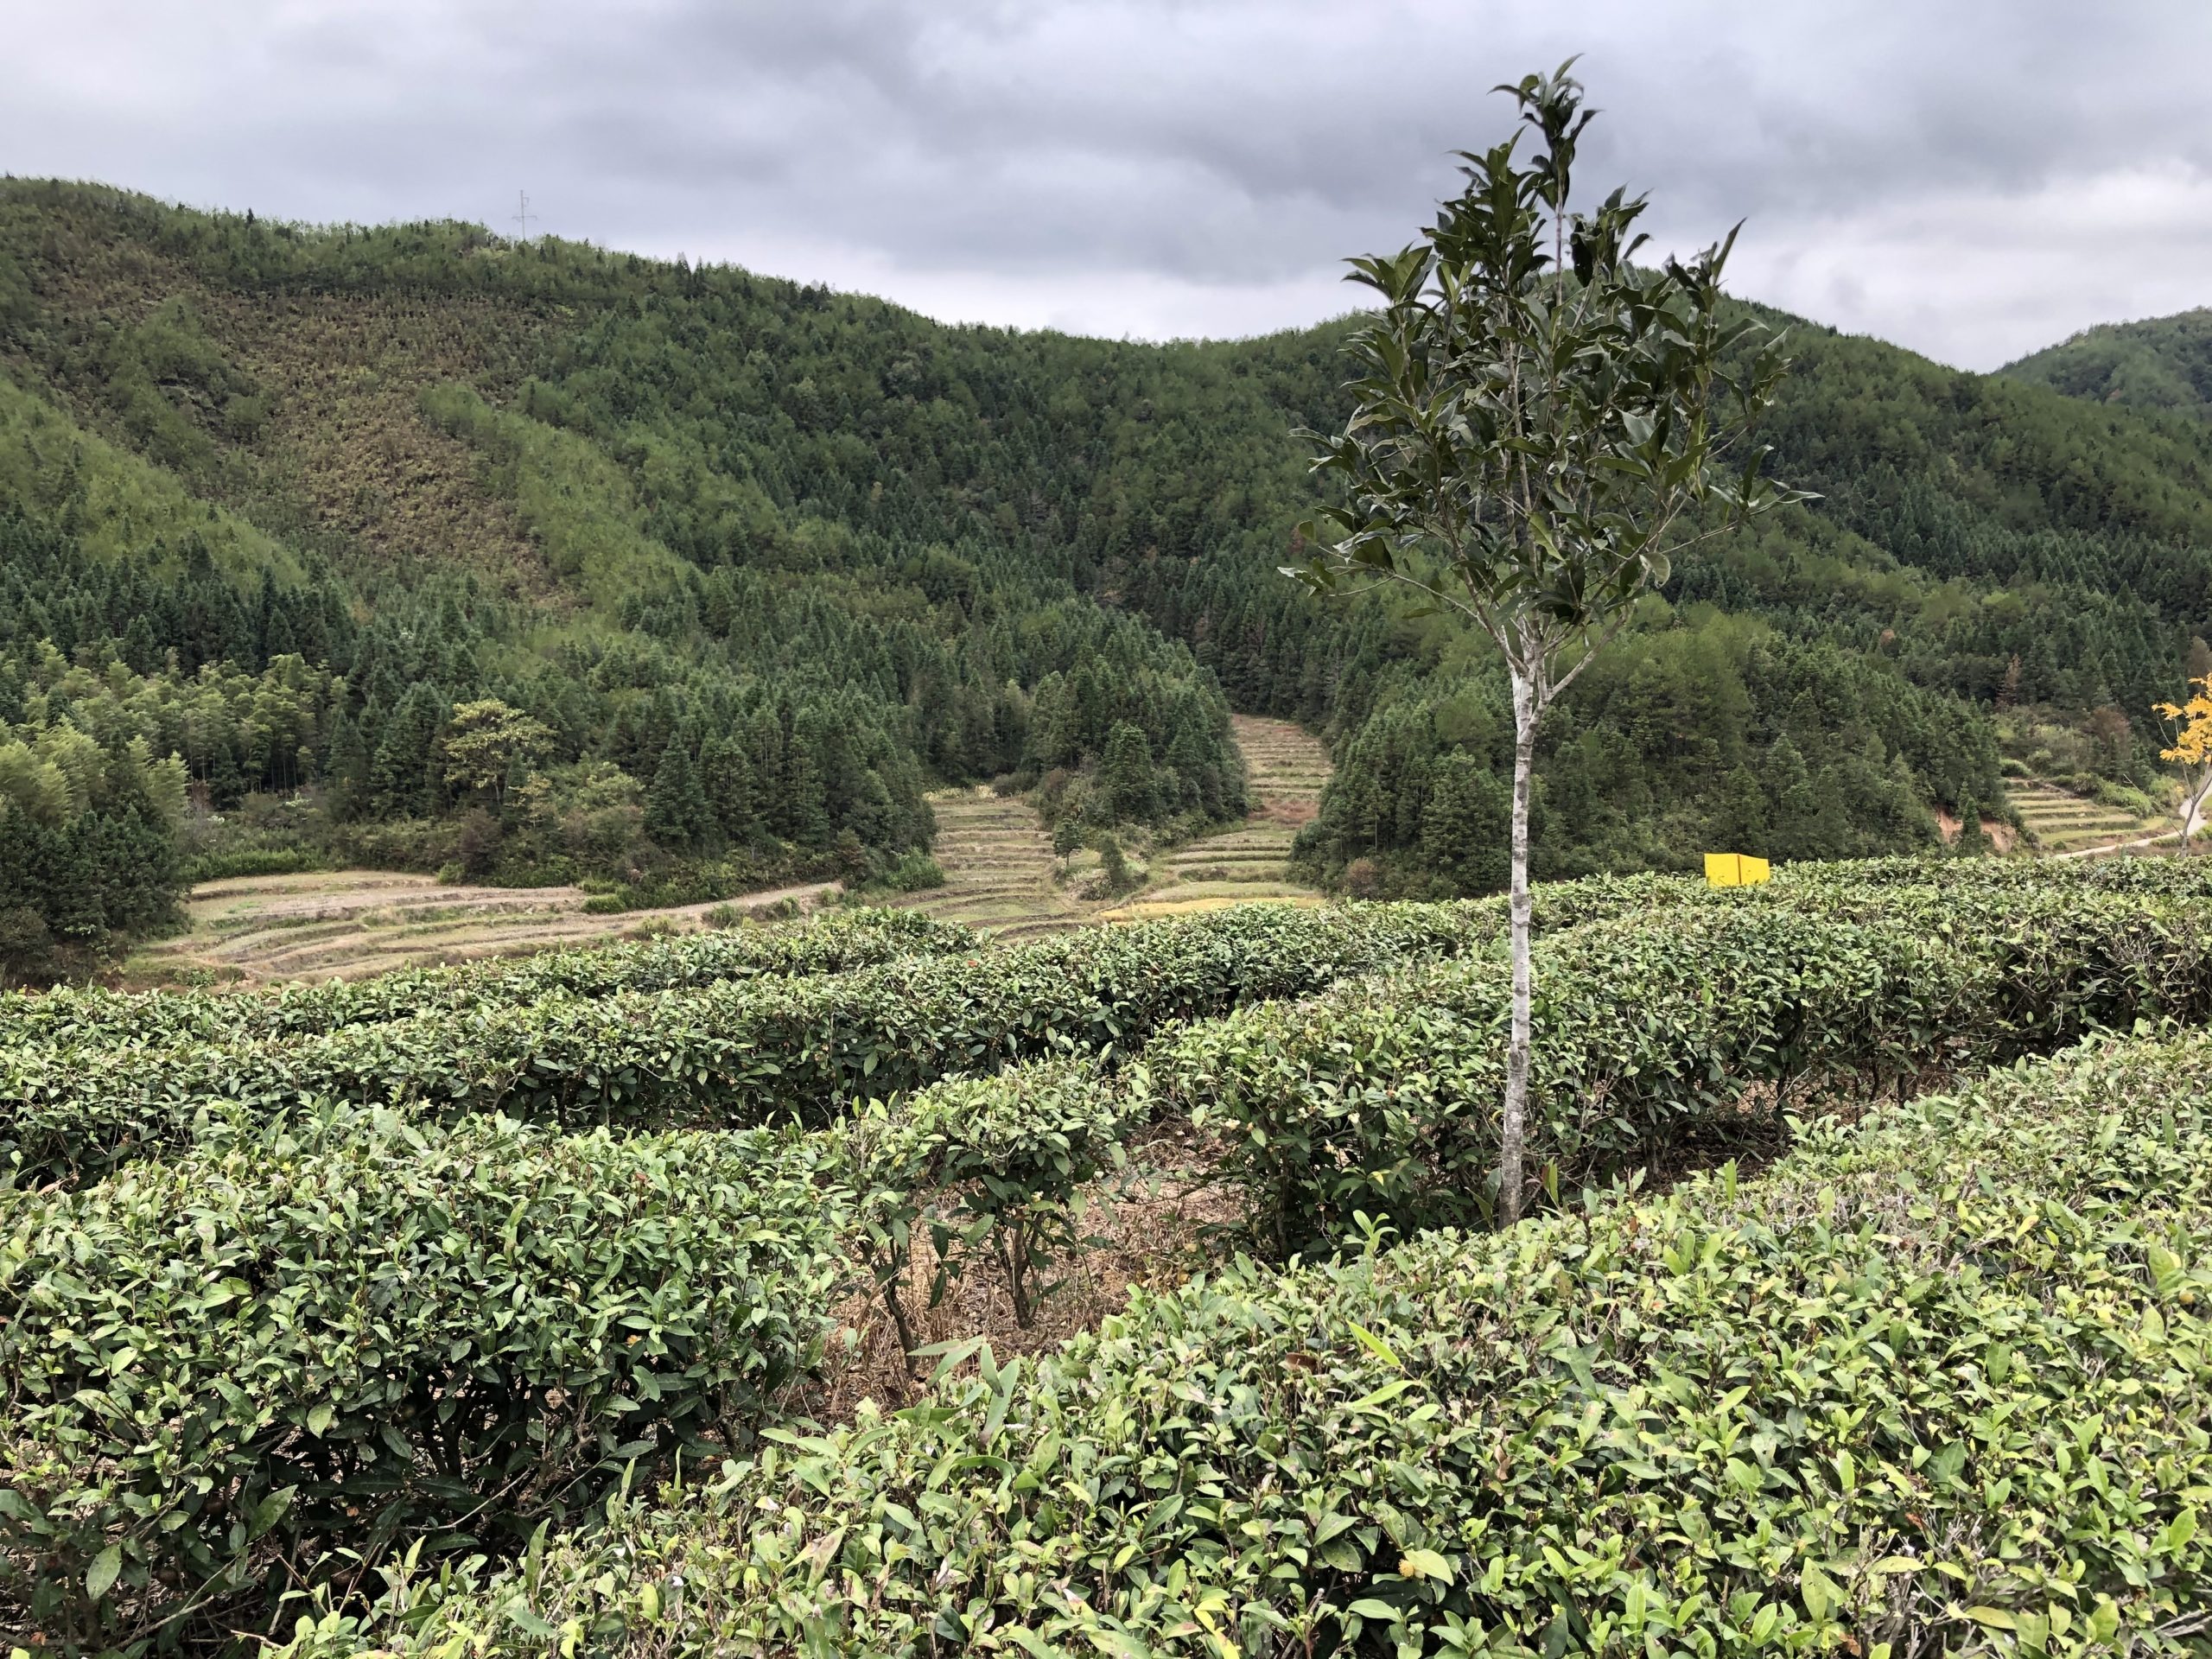 Rows of tea bushes in Mr. Chen’s organic Fujian tea gardens in a valley next to a forested hillside on a cloudy day. A young tree grows among the rows.